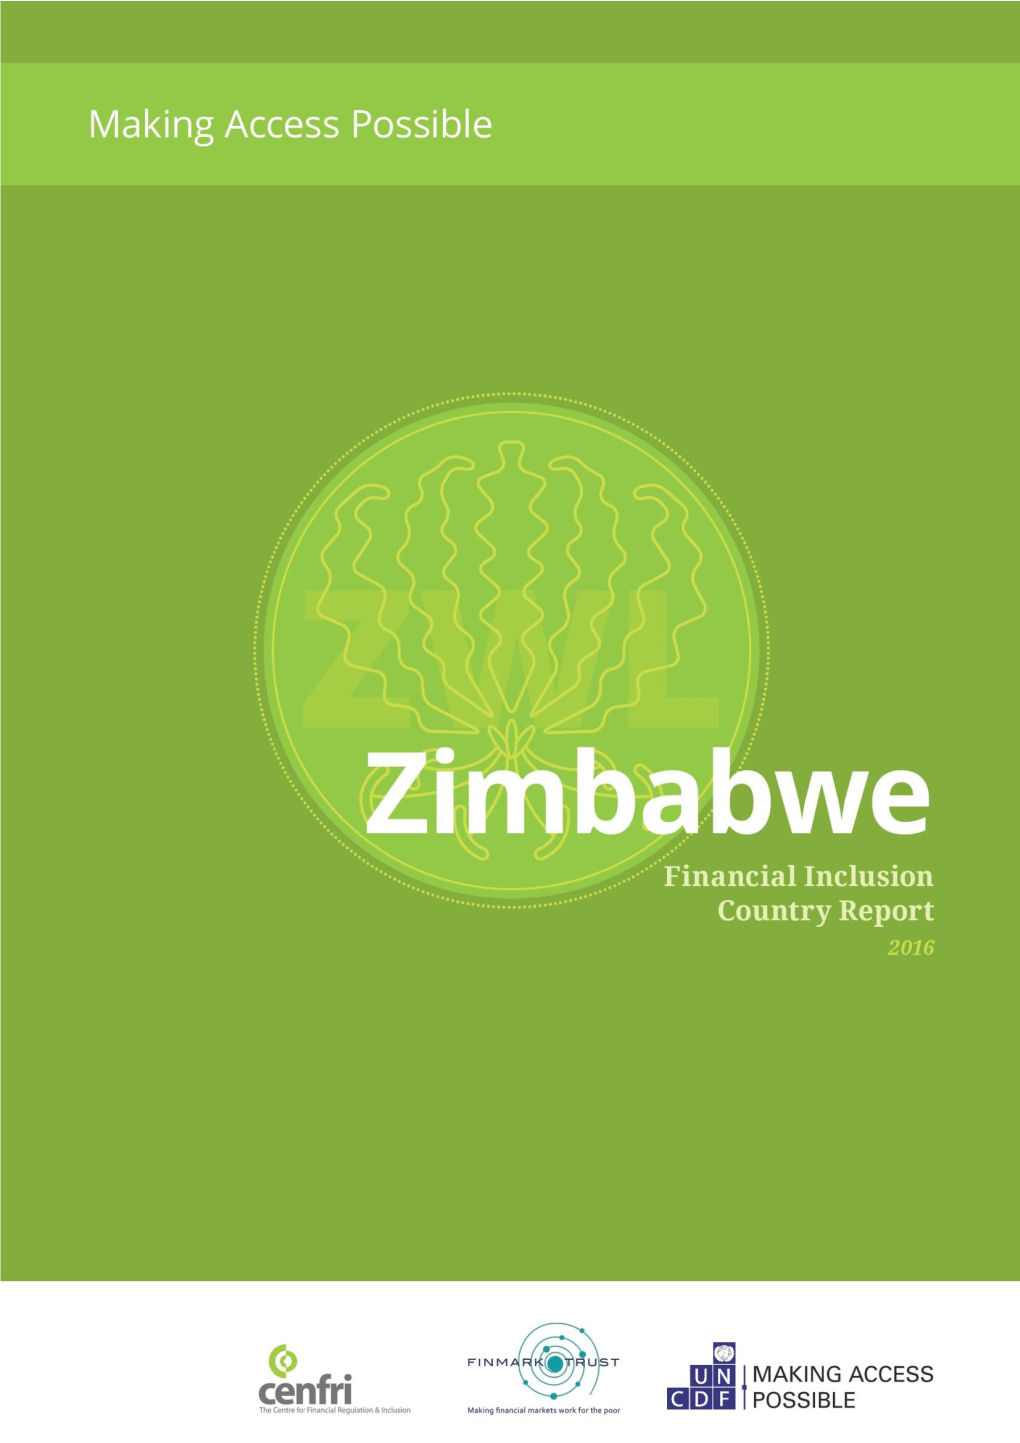 Zimbabwe Was Funded by Finmark Trust and Produced by Cenfri